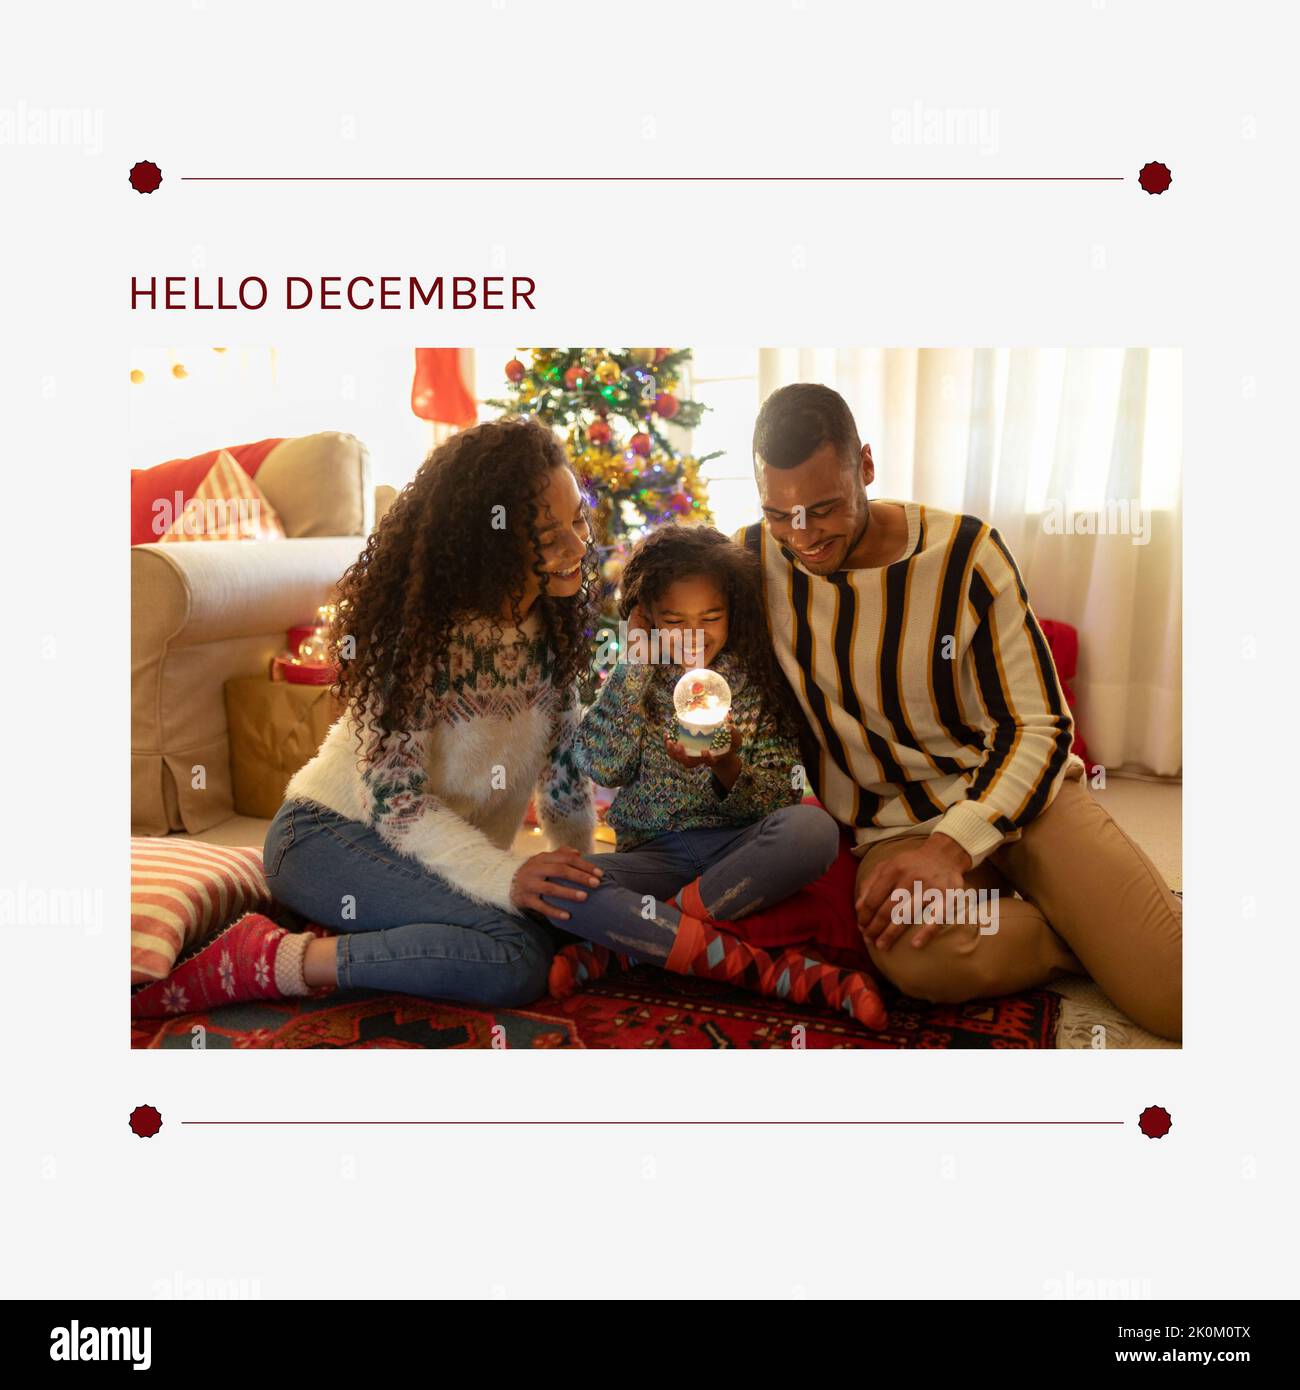 Composition of hello december text over african american family at christmas Stock Photo